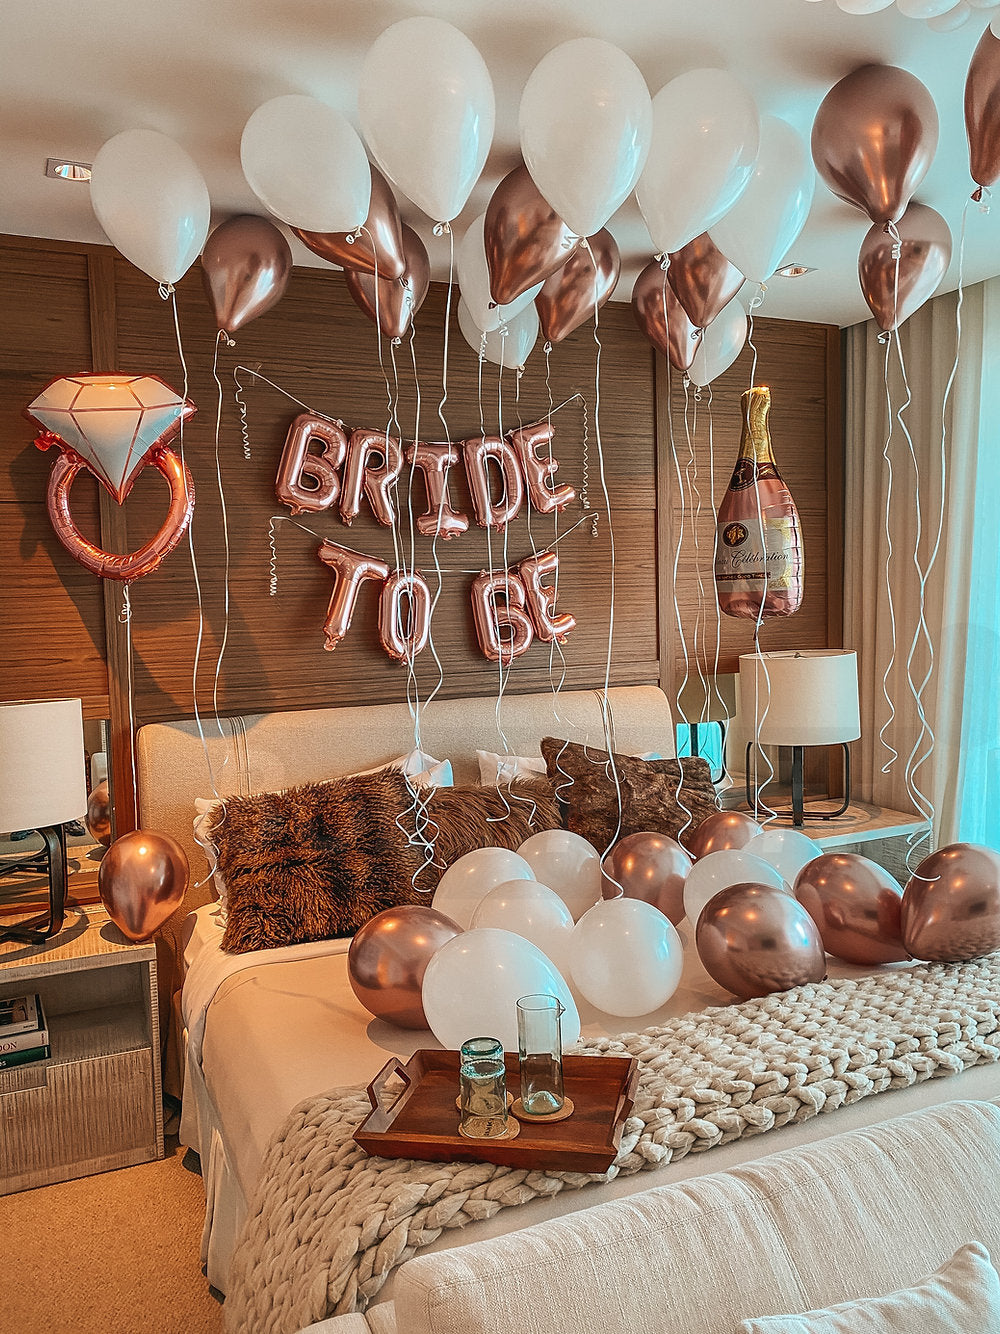 Bride To Be Room Decor – My Balloon Bouquet